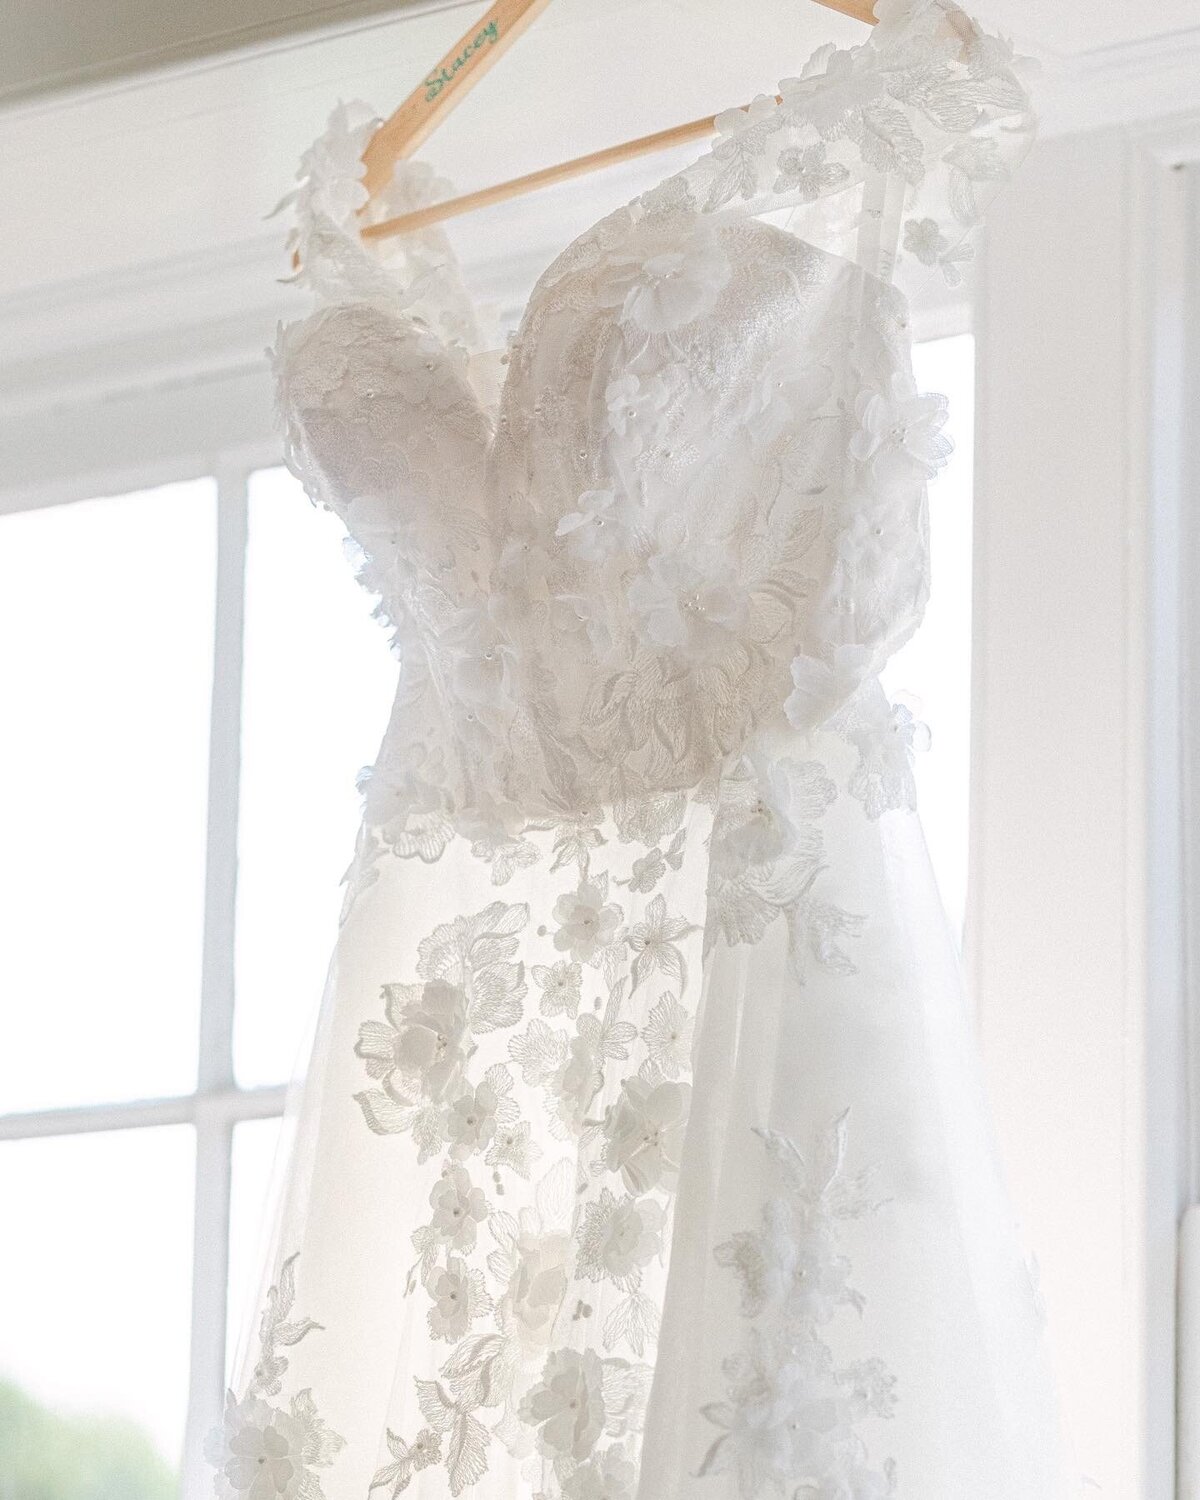 Details of the wedding dress hung in the window